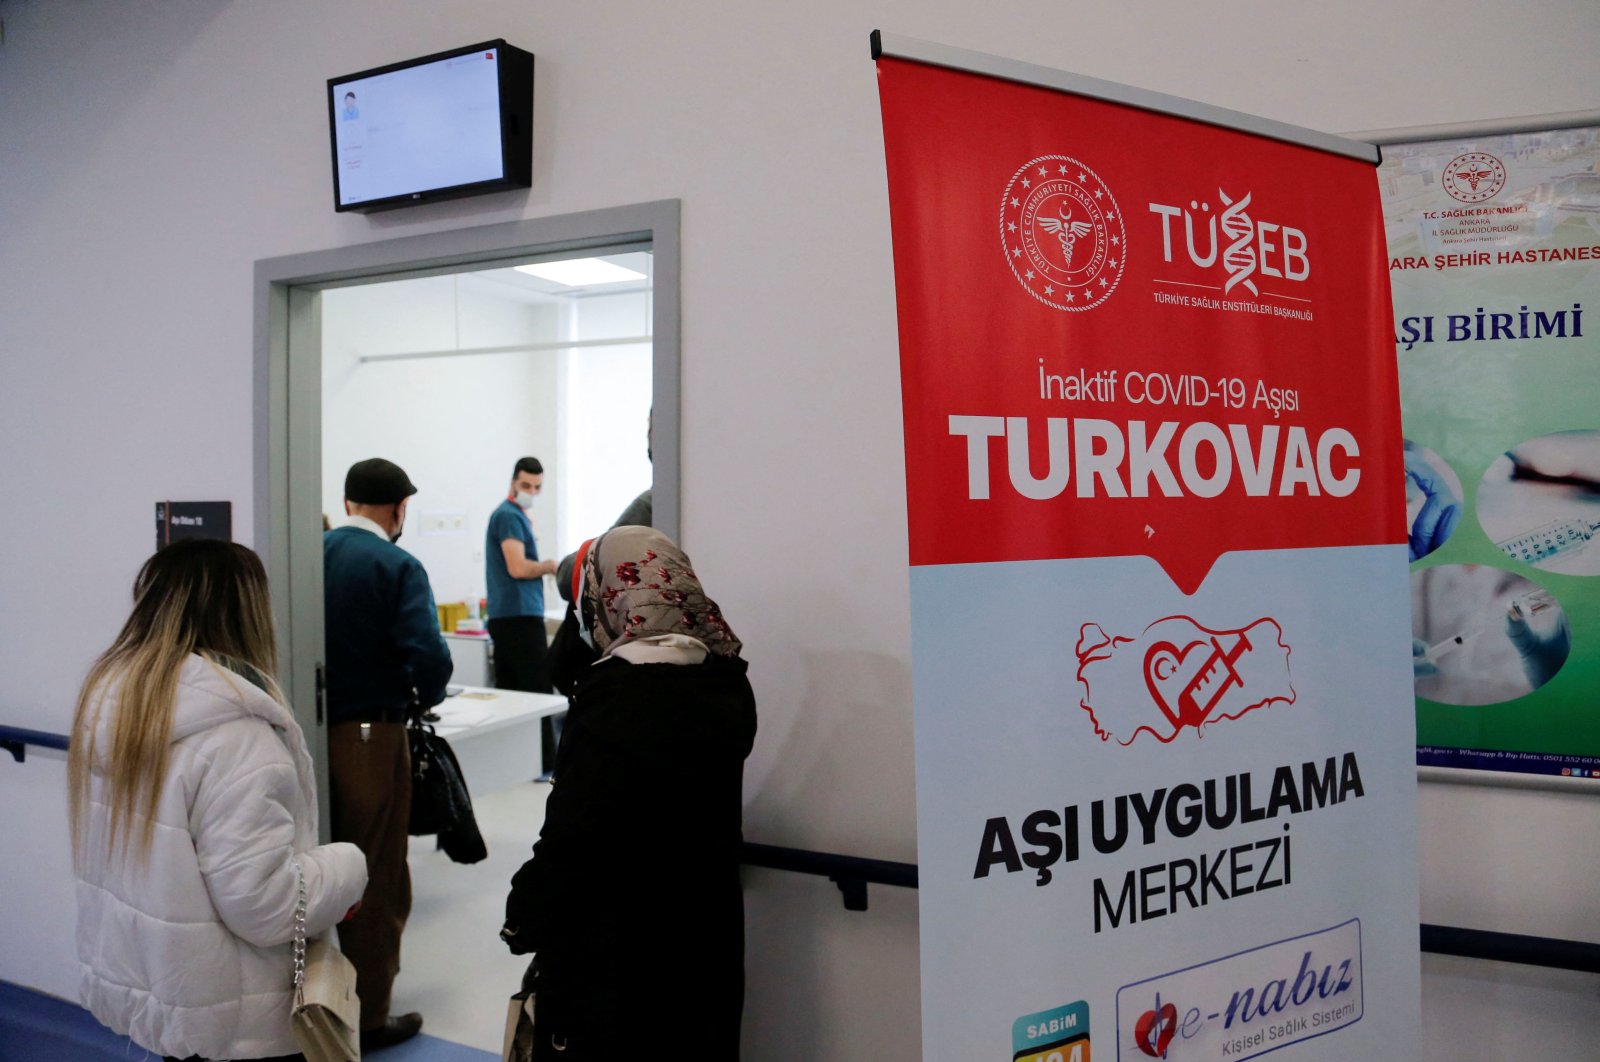 People wait to receive a dose of Turkovac at a hospital, in the capital Ankara, Turkey, Jan. 6, 2022. (Reuters Photo)